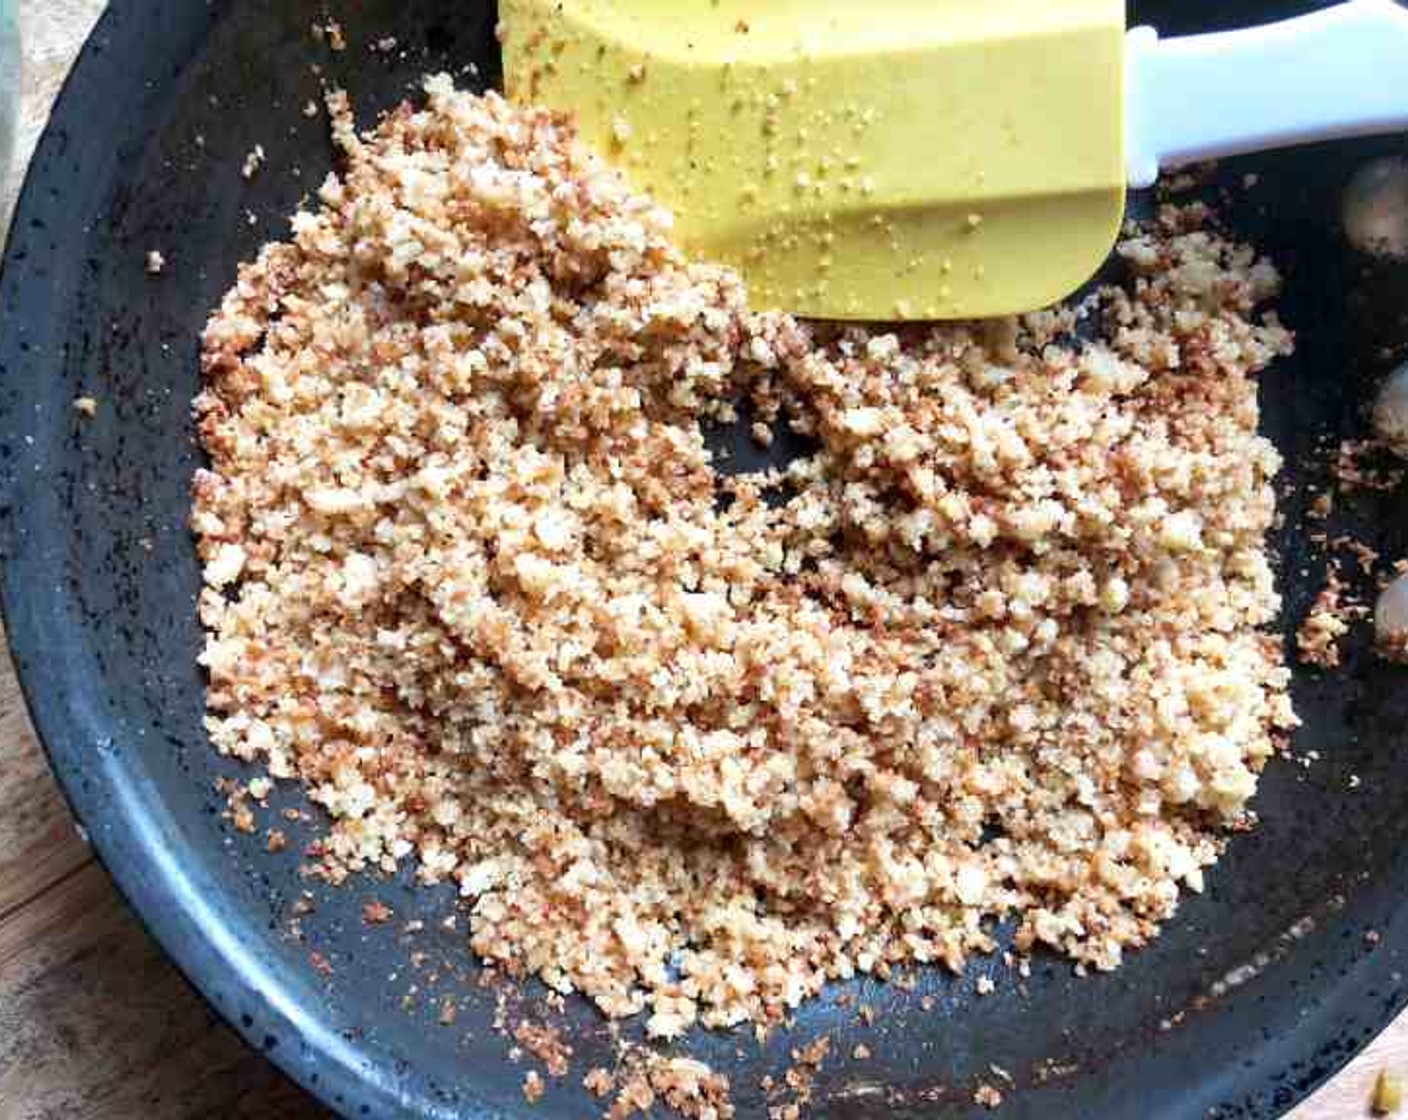 step 10 Meanwhile, melt the Unsalted Butter (2 Tbsp) in a skillet over medium. Add the Panko Breadcrumbs (1/2 cup) and Ground Black Pepper (1/4 tsp) cook, stirring, until golden brown, 3 more minutes.